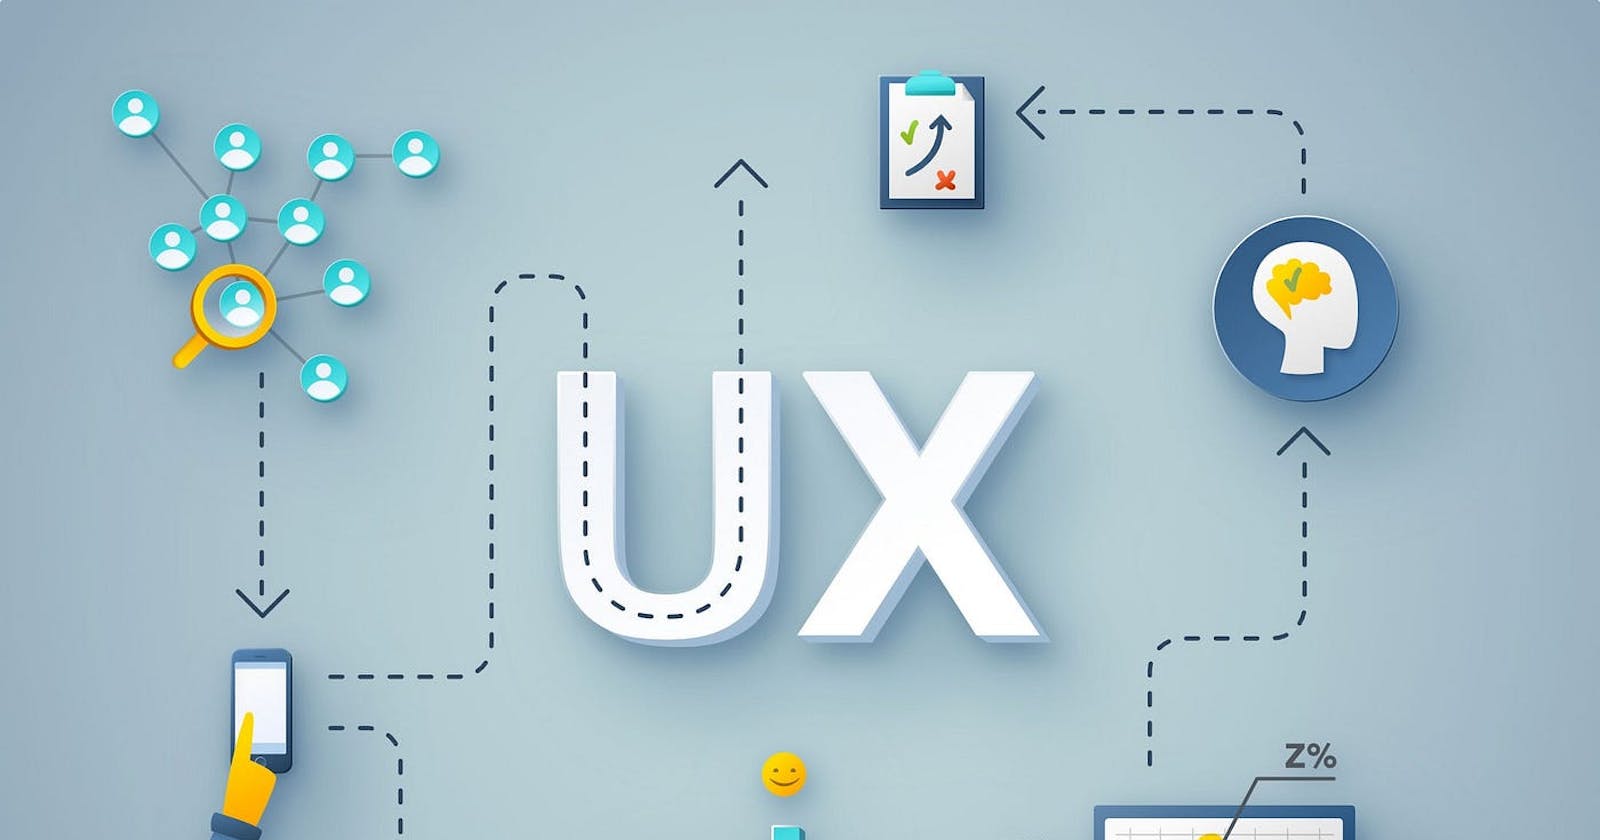 Building a Career in UX Design: Essential Skills and Portfolio Tips  write an articule on this